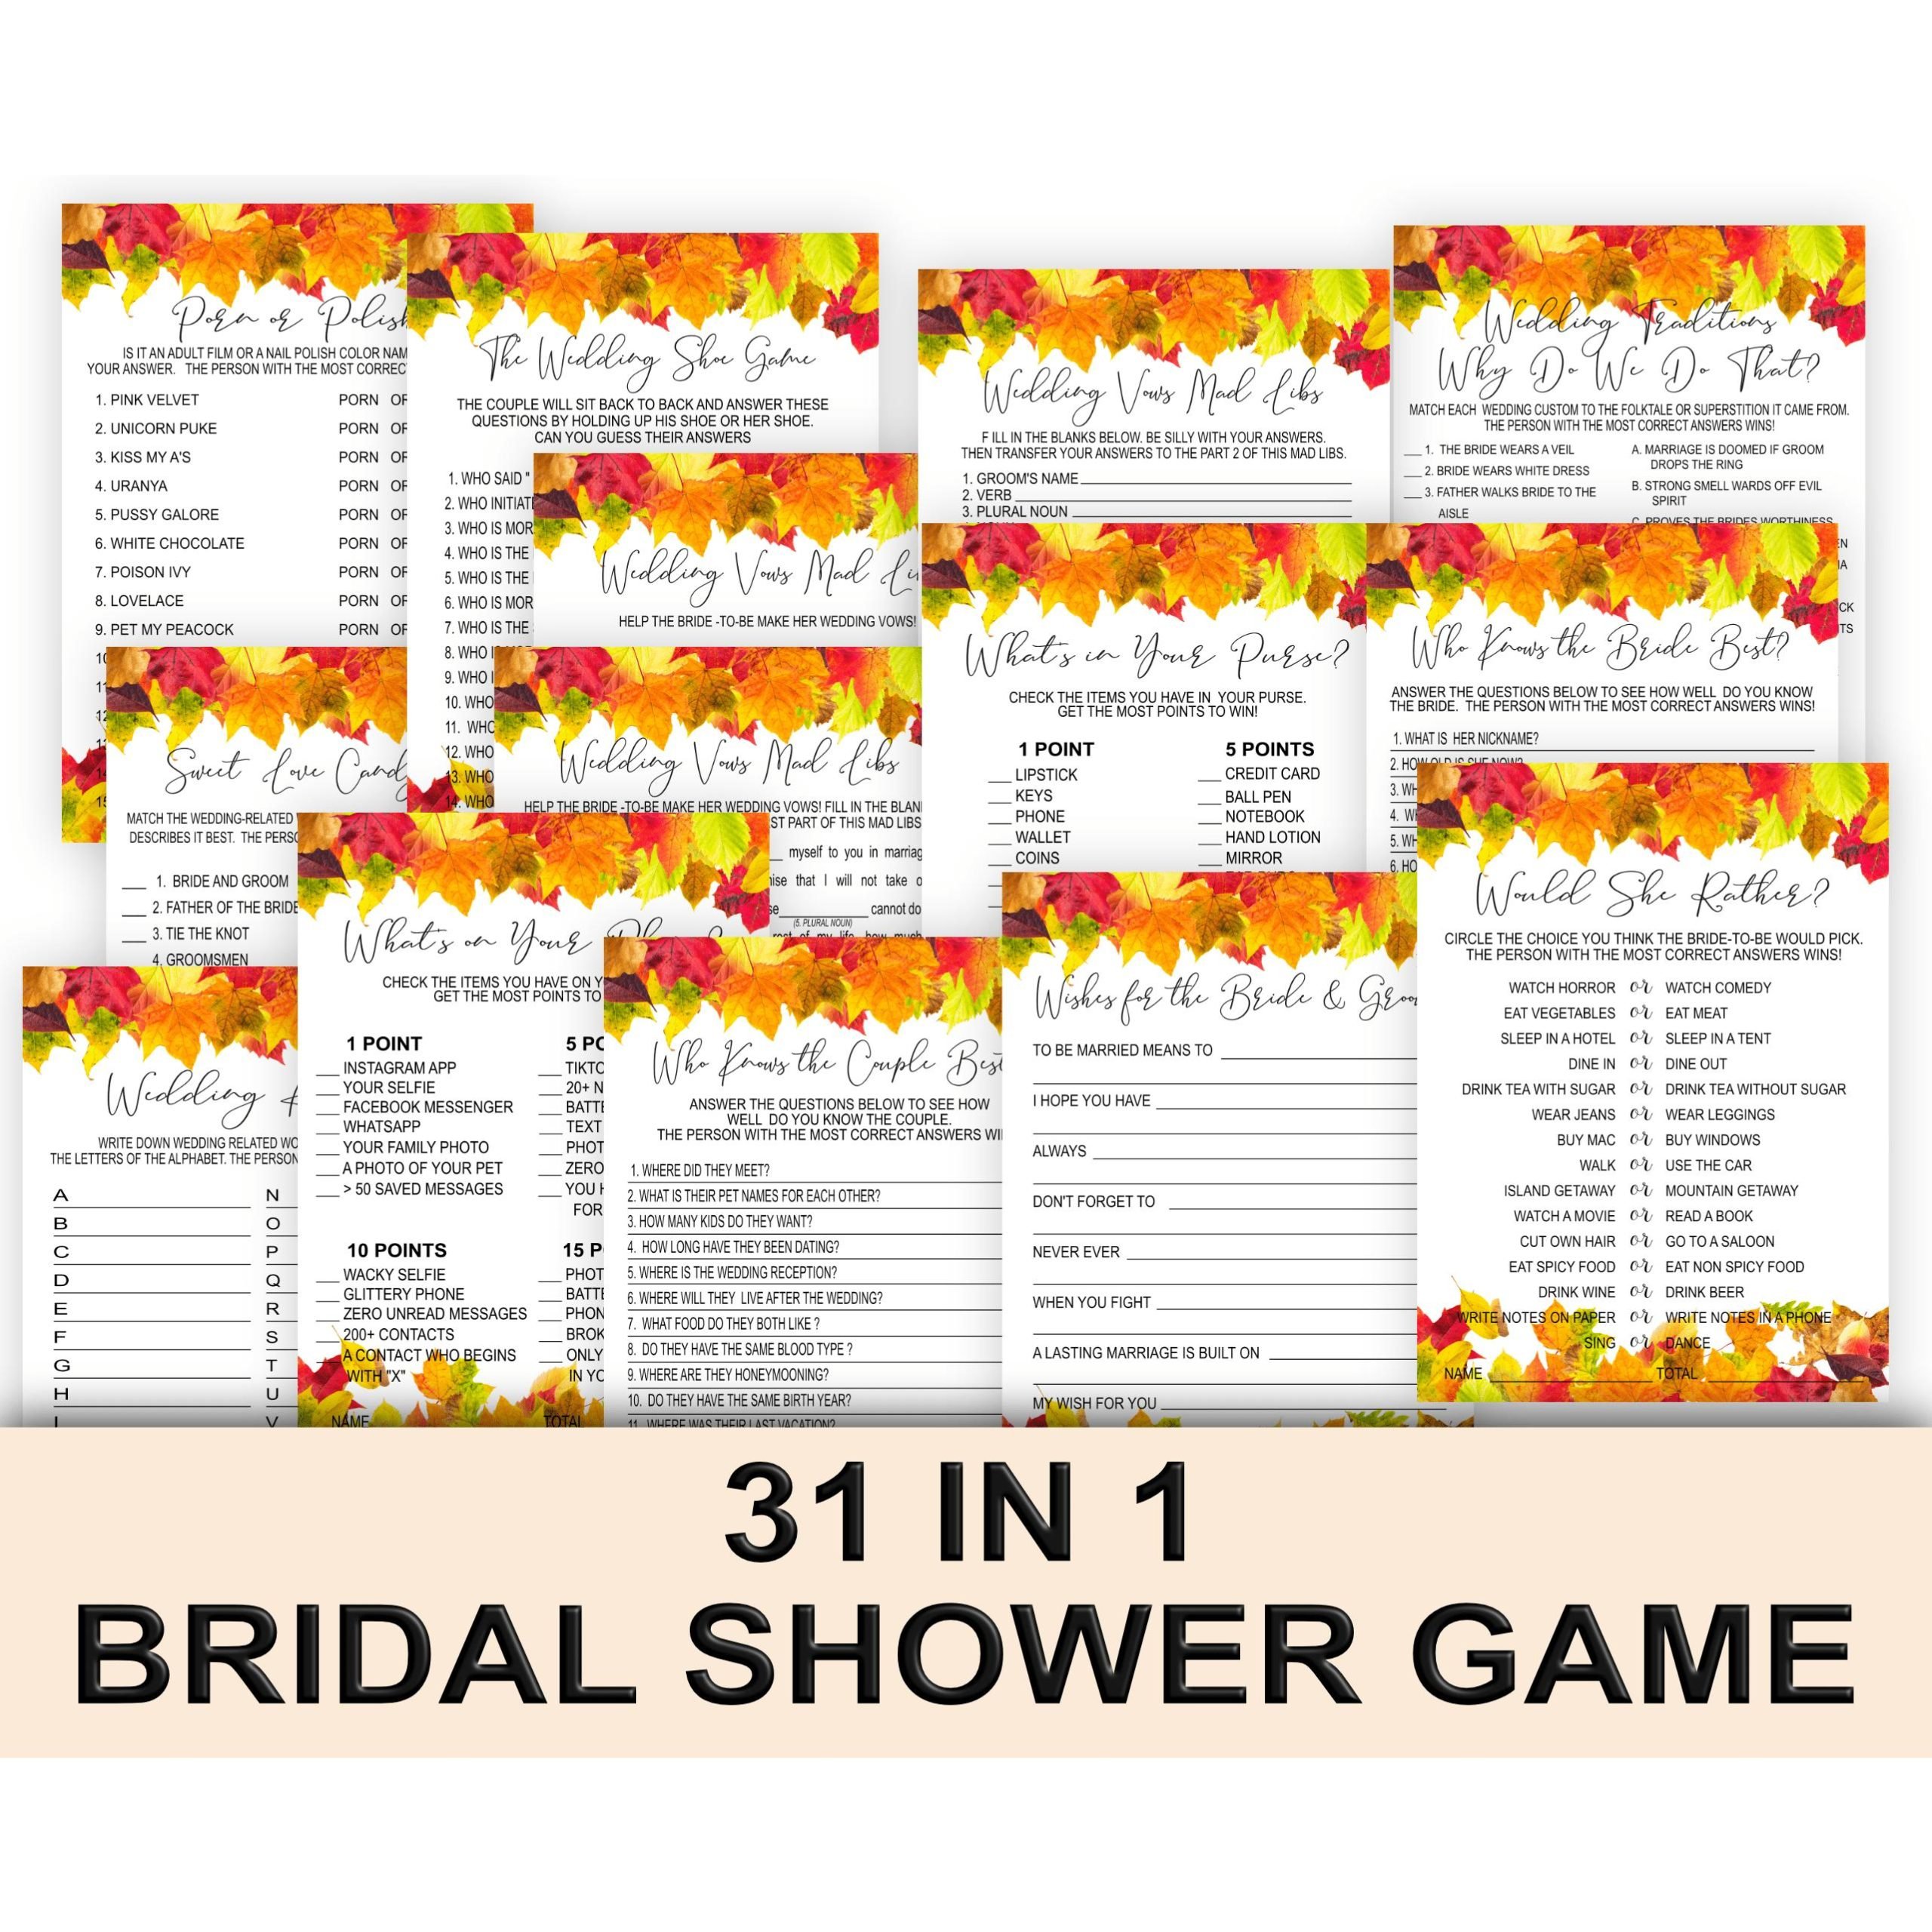 Bridal Shower Games Autumn Bridal Shower Games Bundle with 31 Fun and Festive Games Printable Affordable bridal shower games